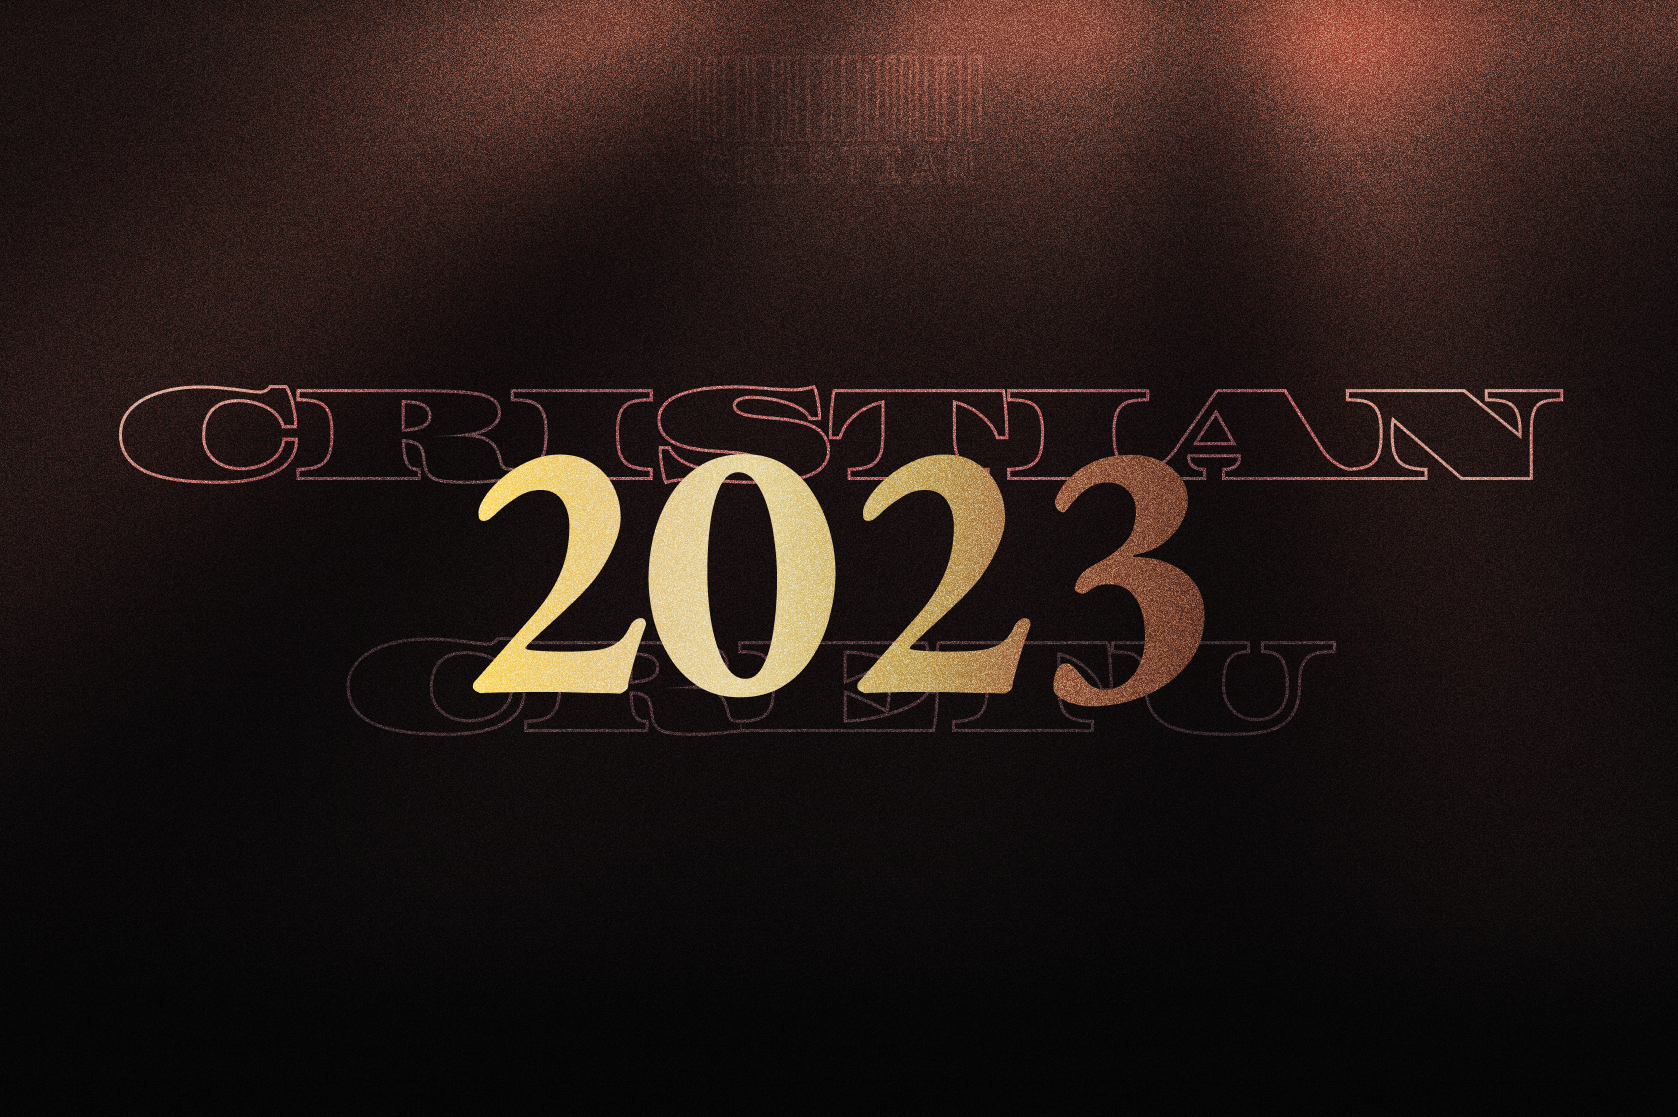 Revisiting 2023